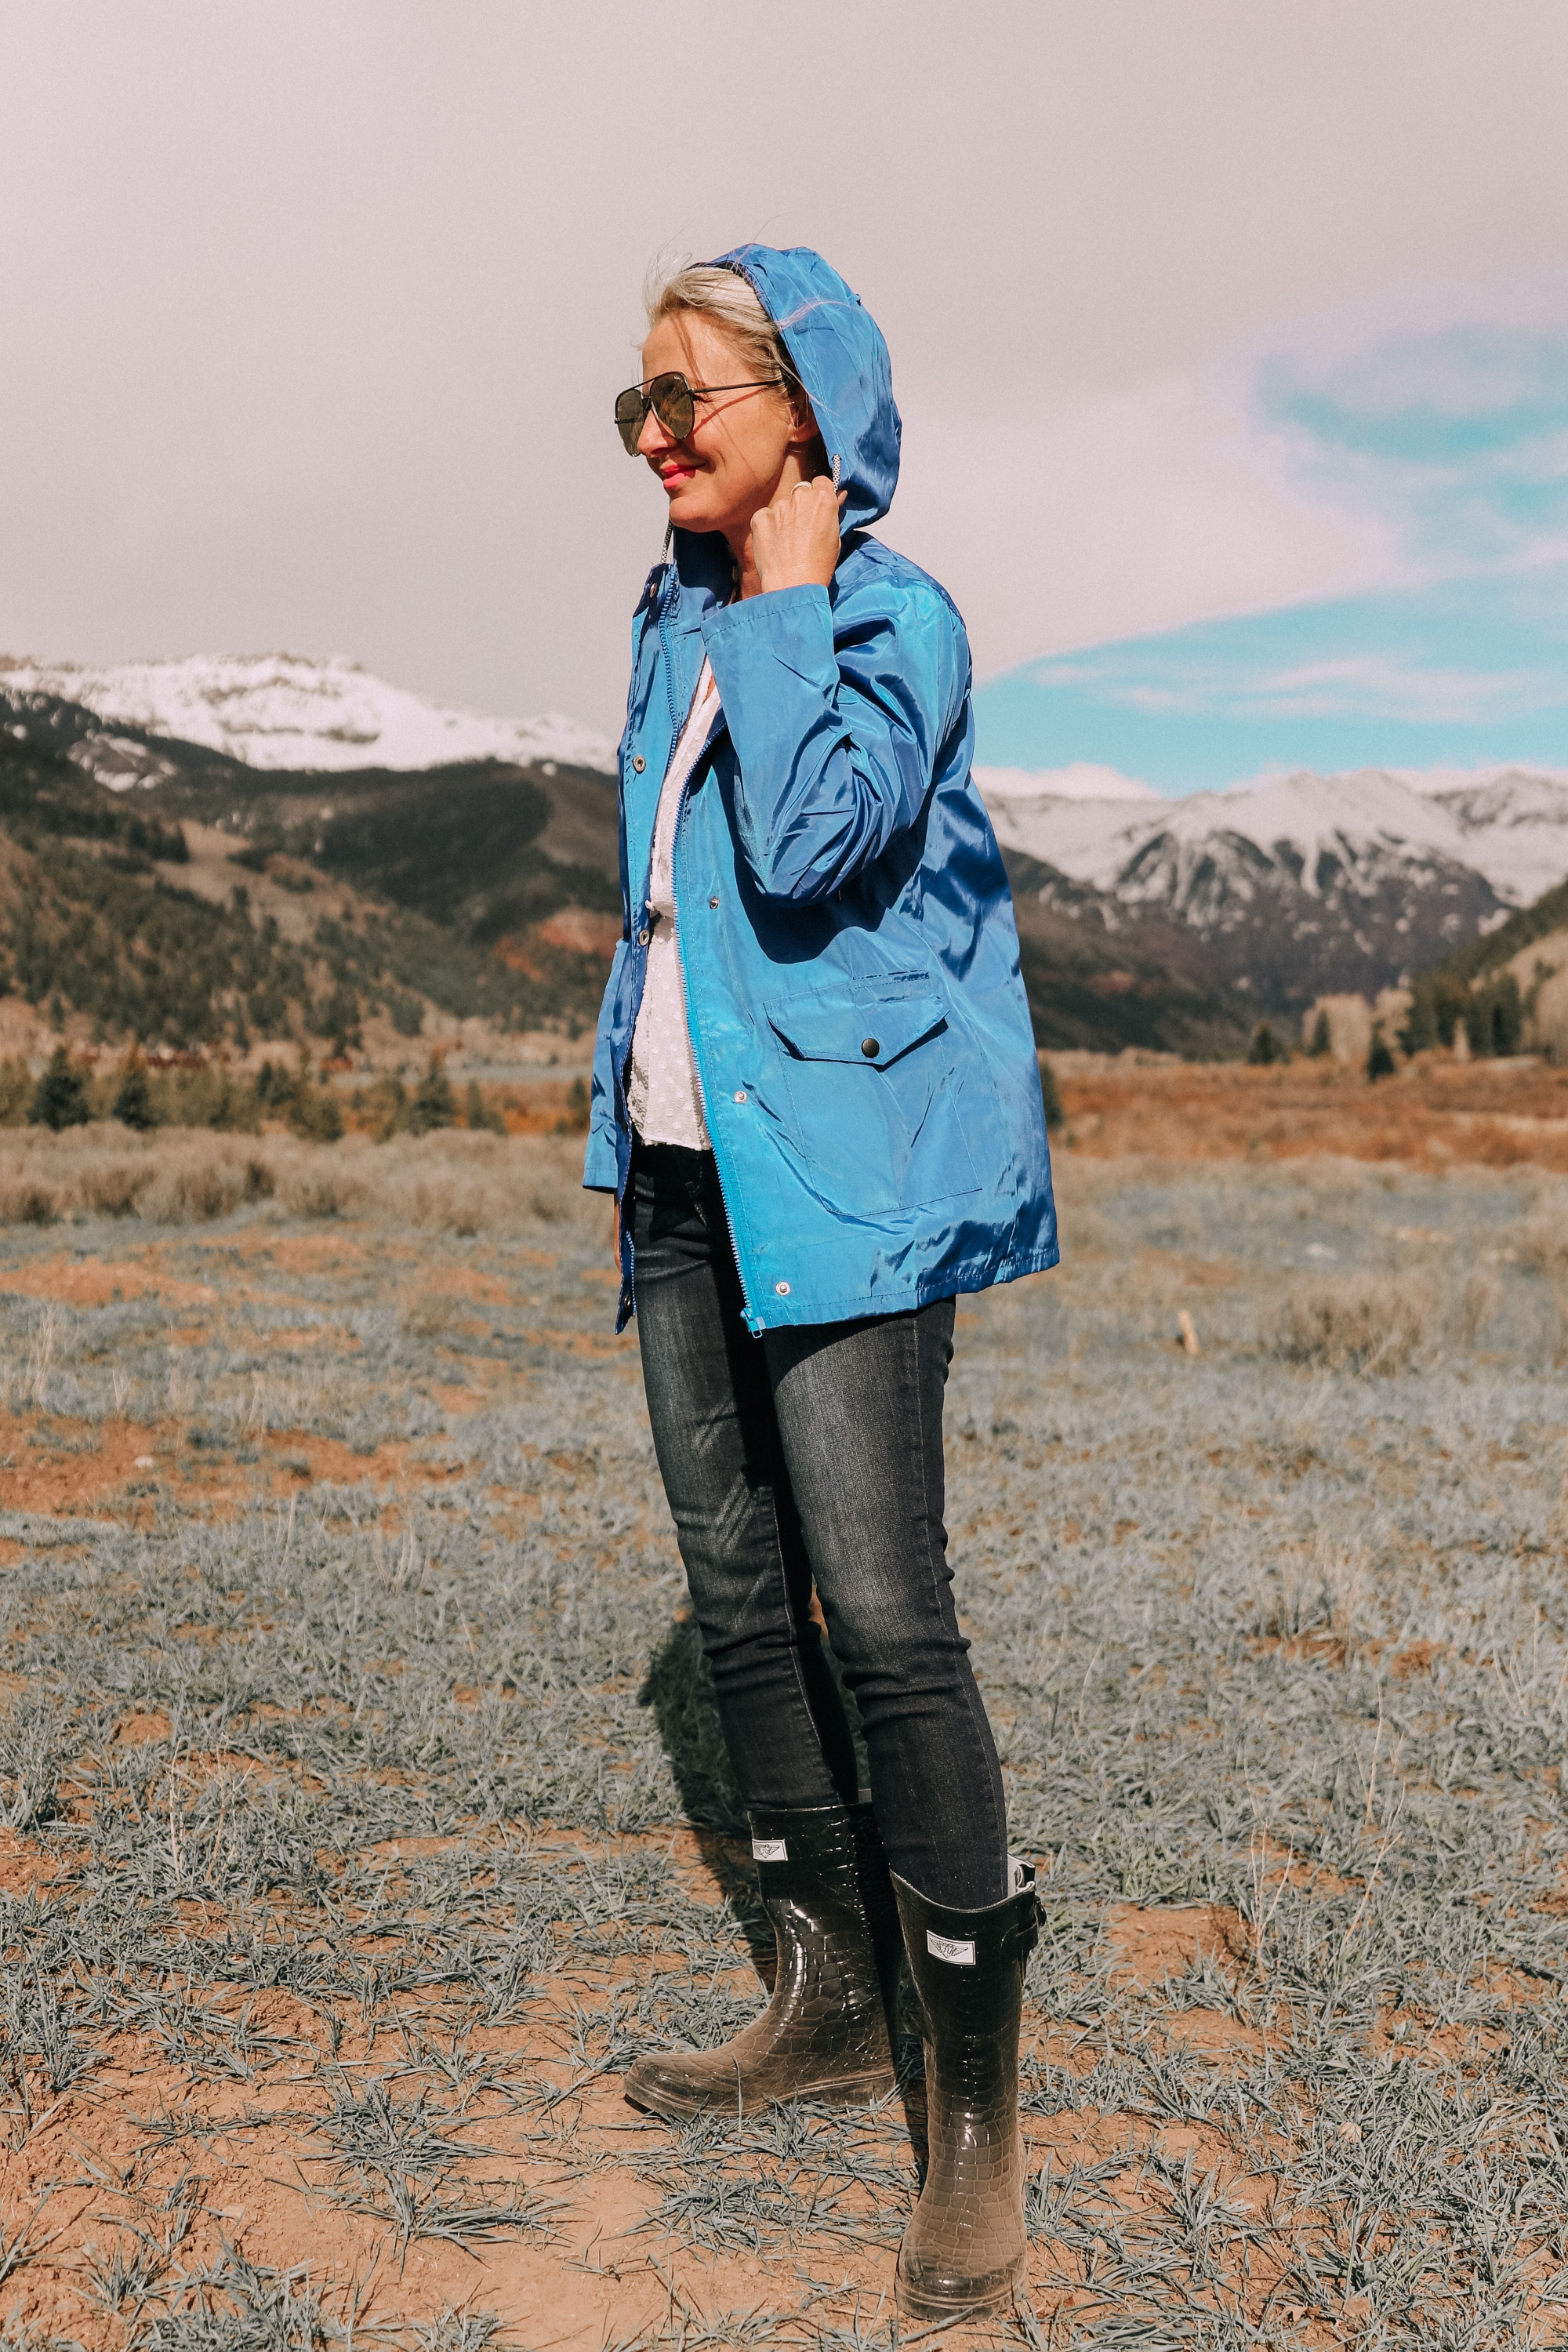 fashion blogger erin busbee in telluride colorado wearing affordable blue waterproof lightweight hooded raincoat with hood over head paired with dark wash skinny ankle jeans styled with croc patterned rubber rain boots